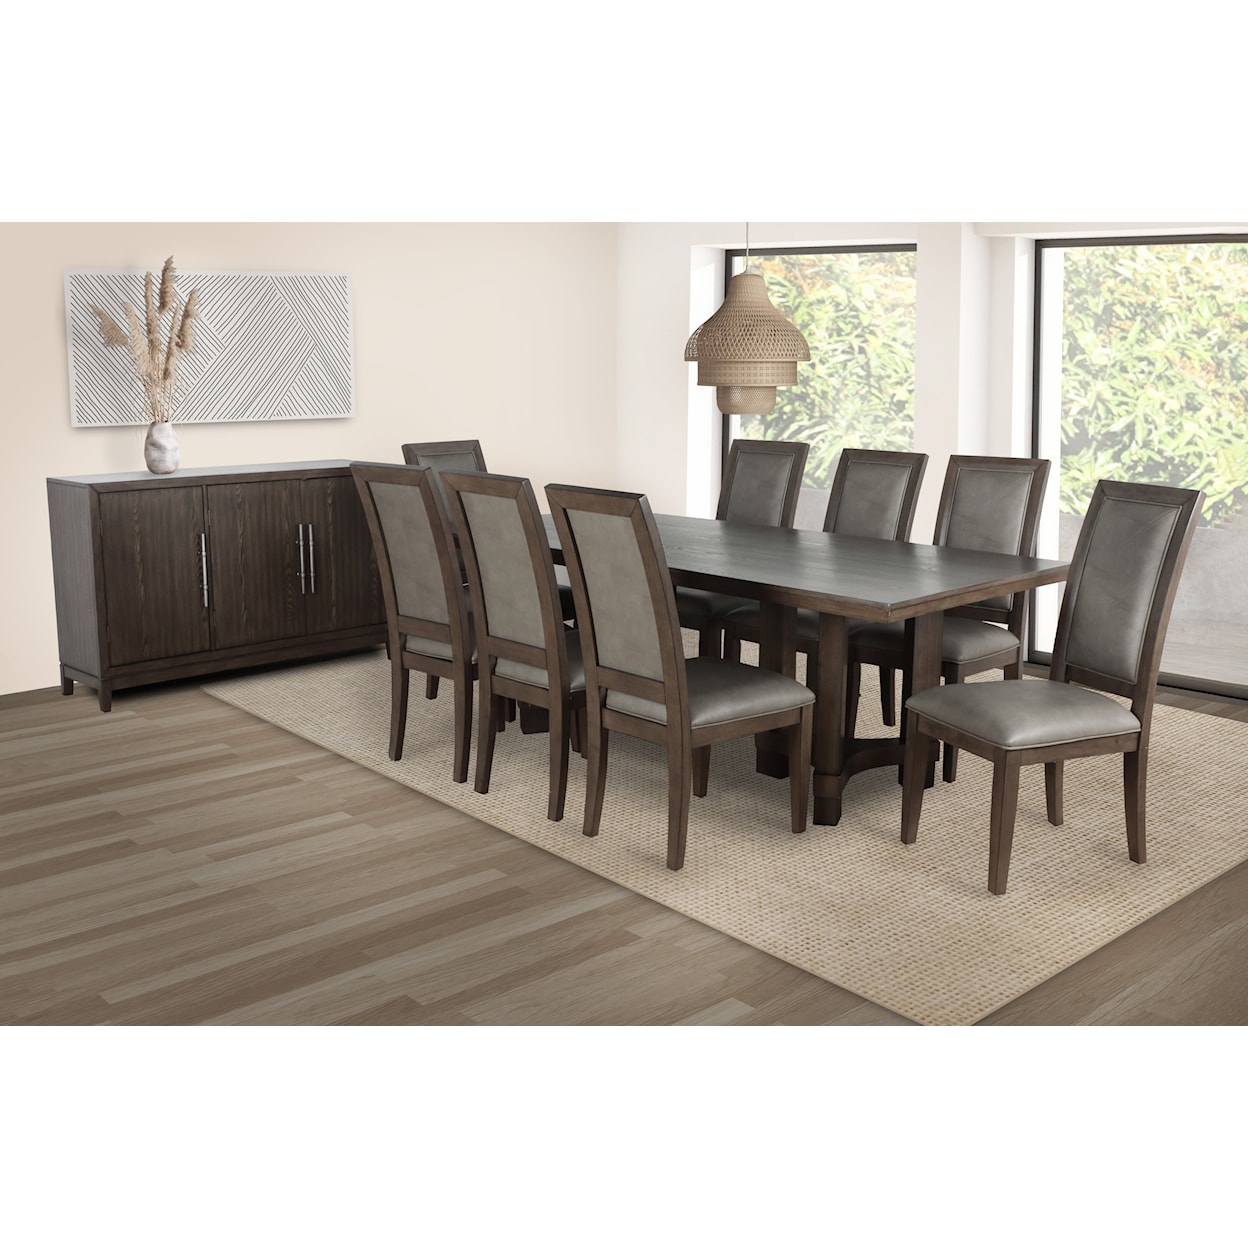 New Classic Cityscape Dining Room Group